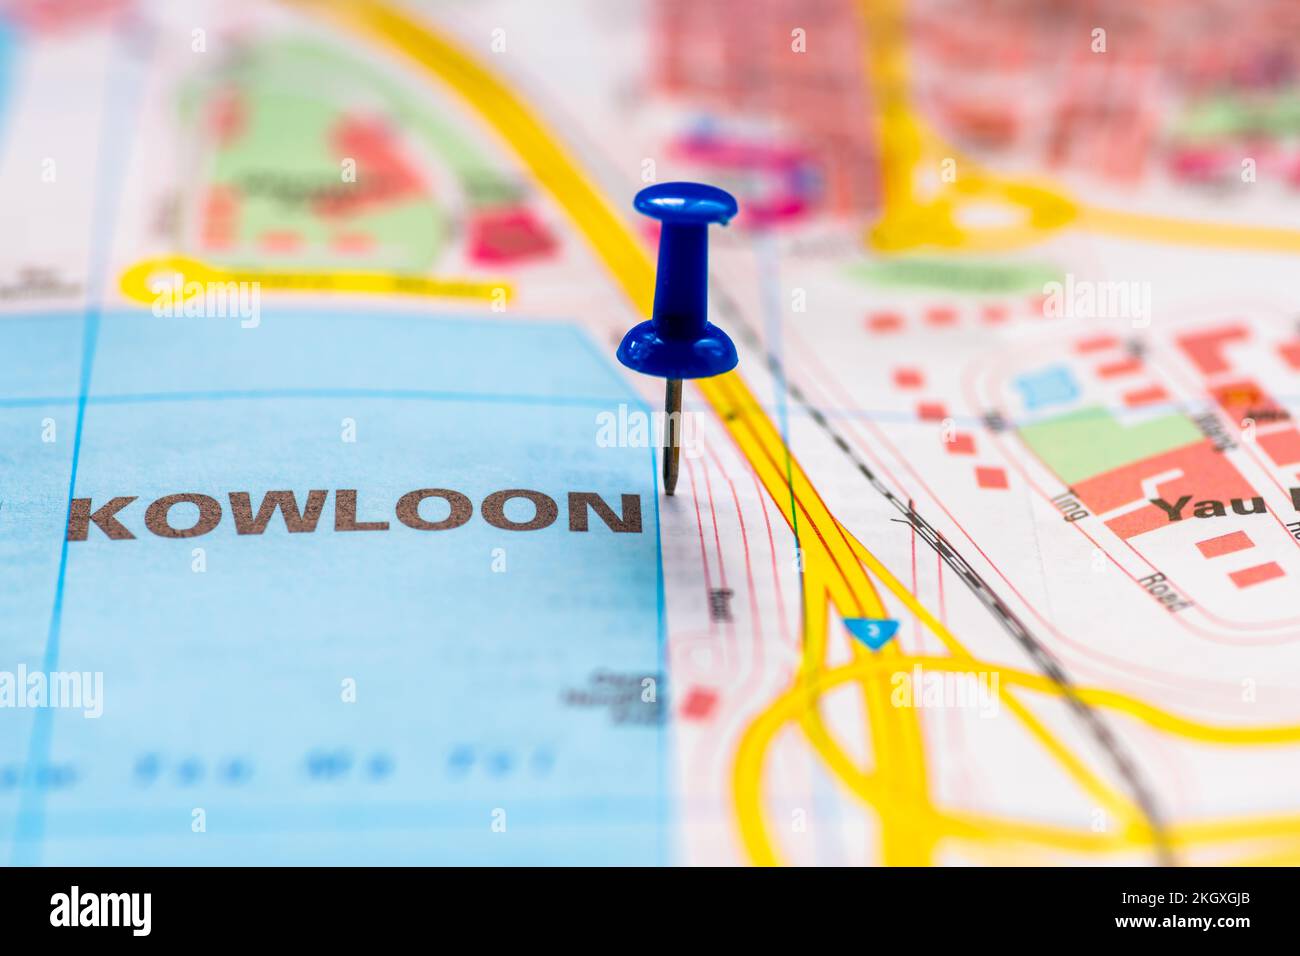 The map location for Kowloon, Hong Kong, China, marked by a blue pushpin. Stock Photo